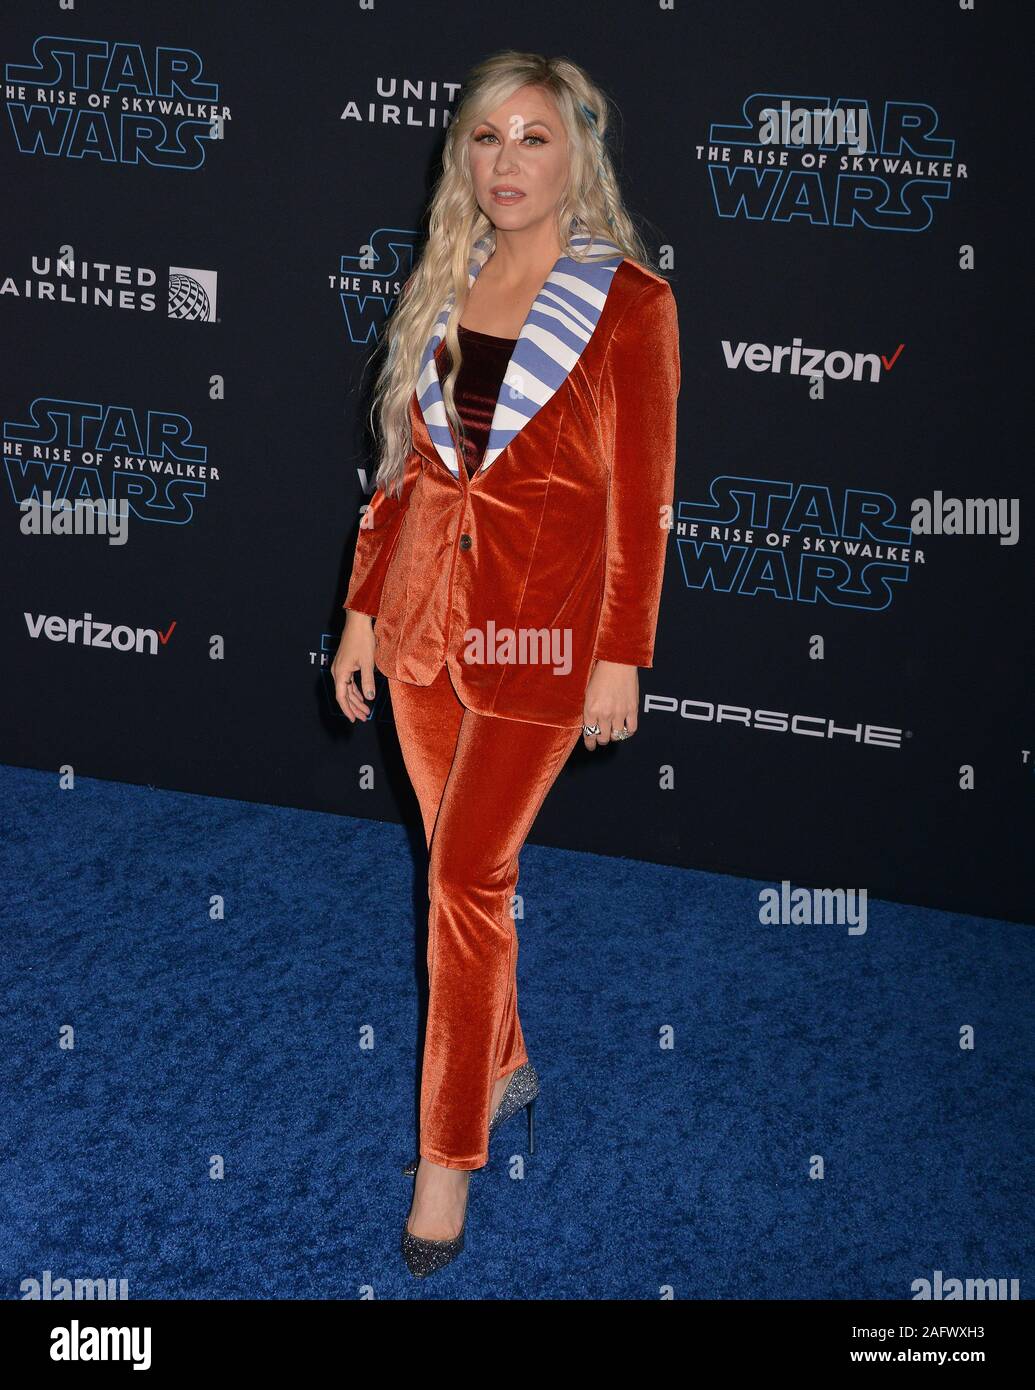 Los Angeles, USA. 17th Dec, 2019. Ashley Eckstein 051 arrives at the premiere of Disney's 'Star Wars: The Rise Of The Skywalker' on December 16, 2019 in Hollywood, California Credit: Tsuni/USA/Alamy Live News Stock Photo